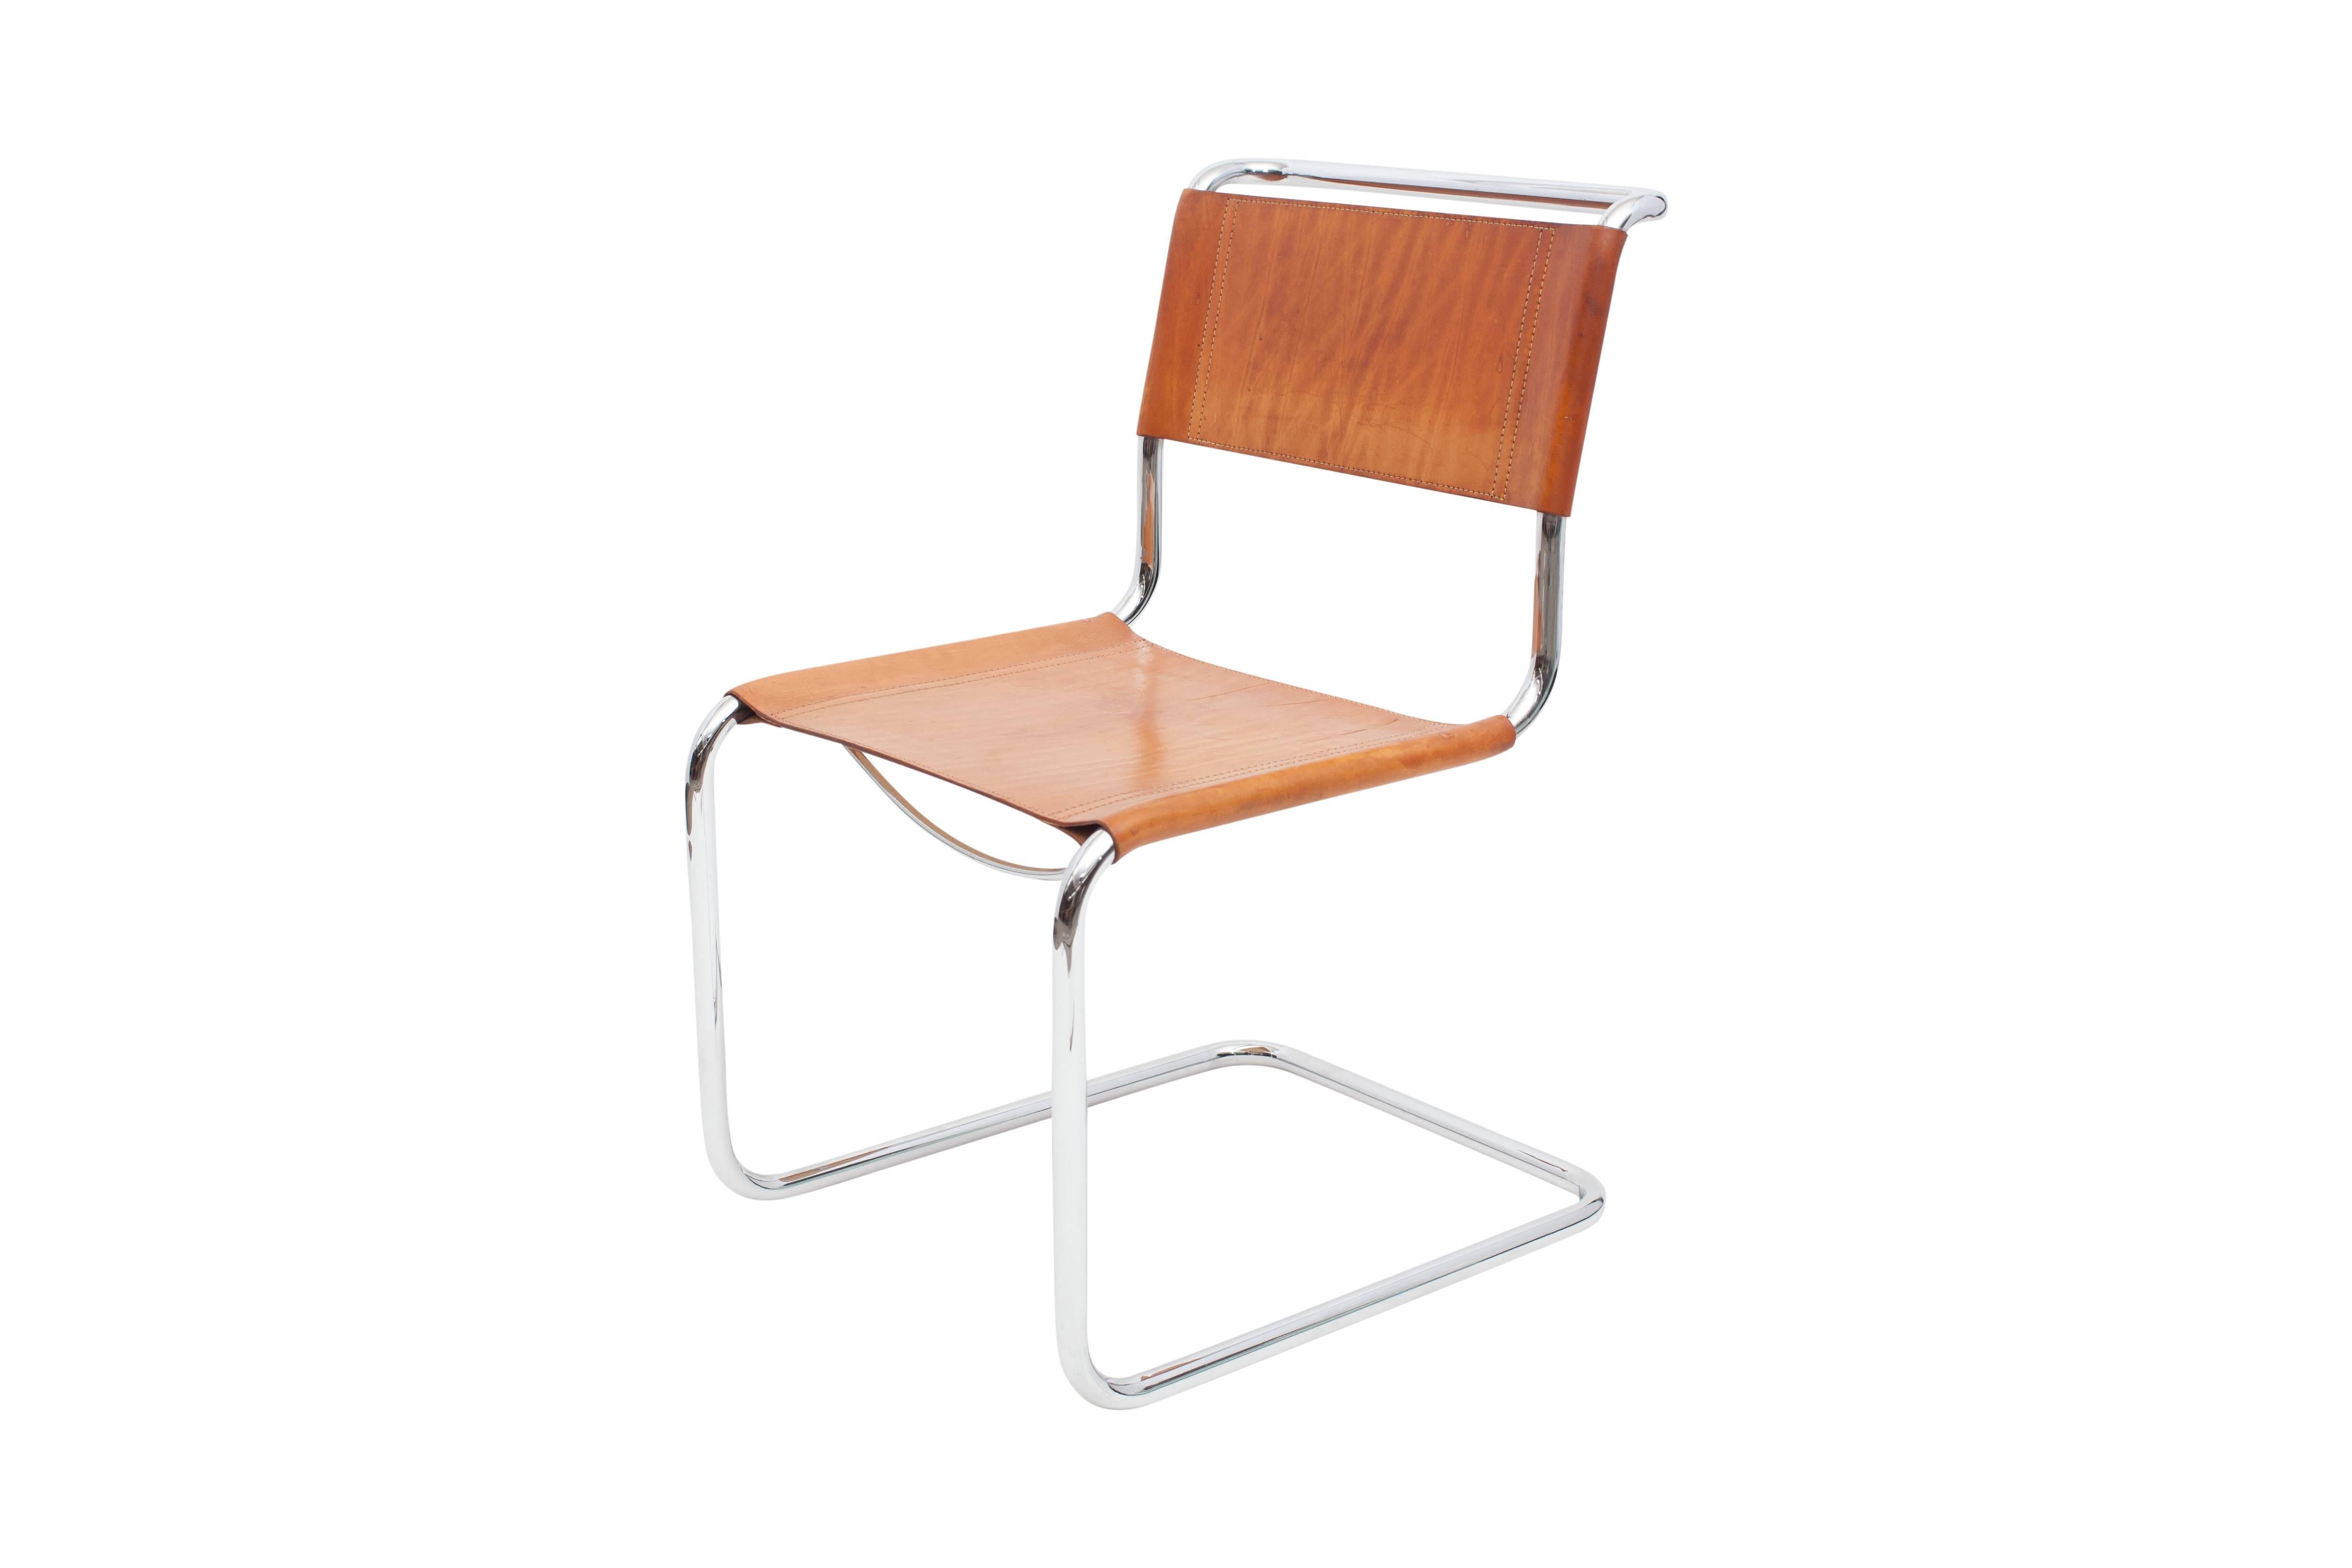 Italian Tubular Cantilever Chairs with Cognac Leather Seating